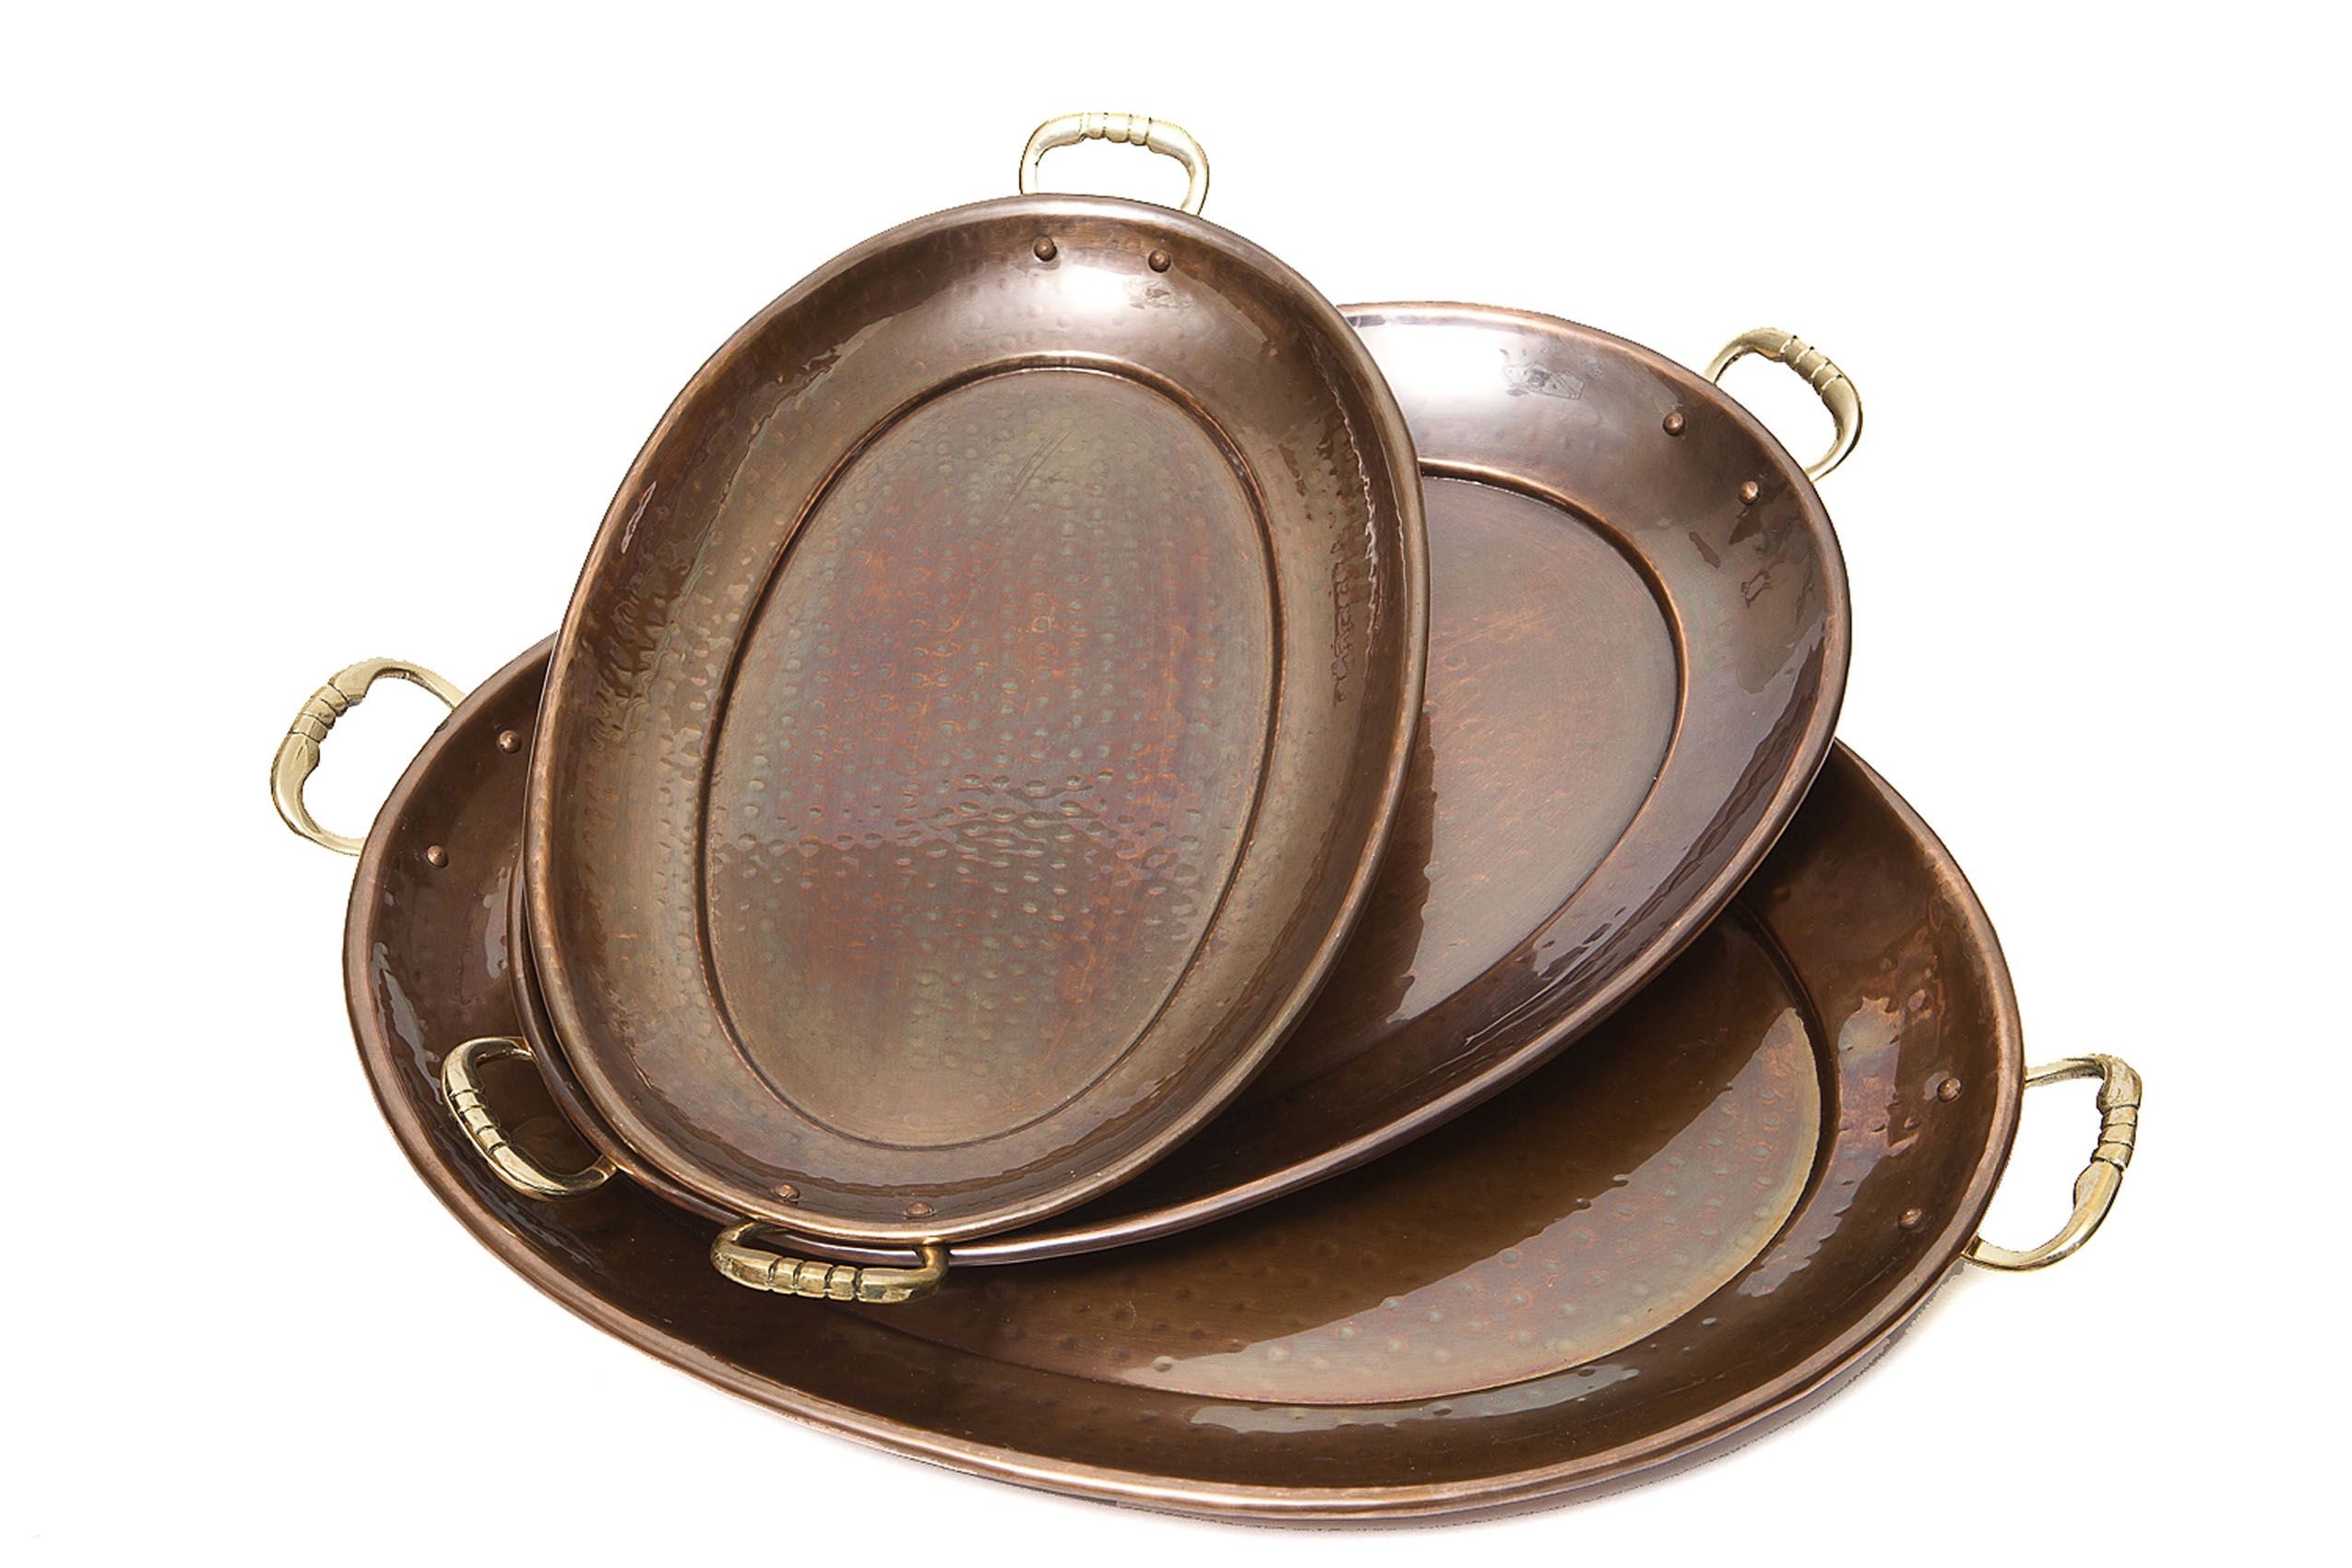 Old Dutch International 254 Decor Antique Copper Oval Tray with Wrought Iron Handles, Set of 3